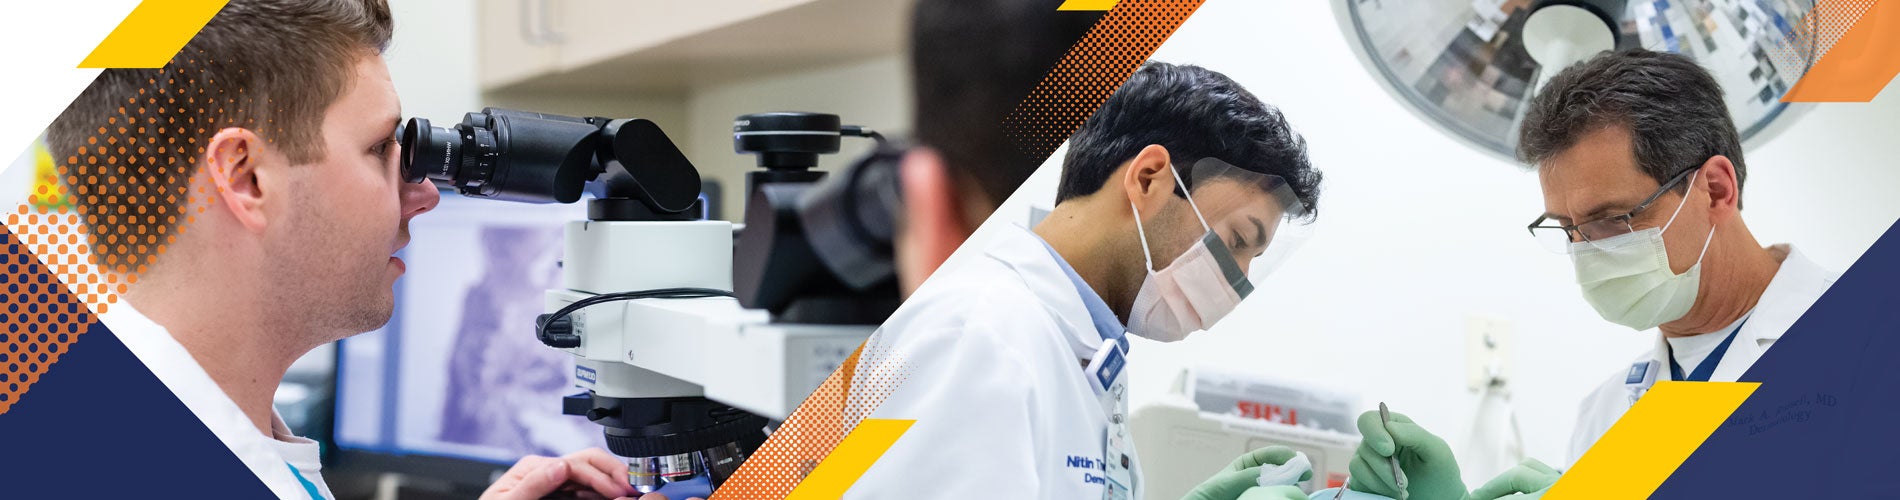 banner image of mohs fellowship looking at microscope and performing surgery